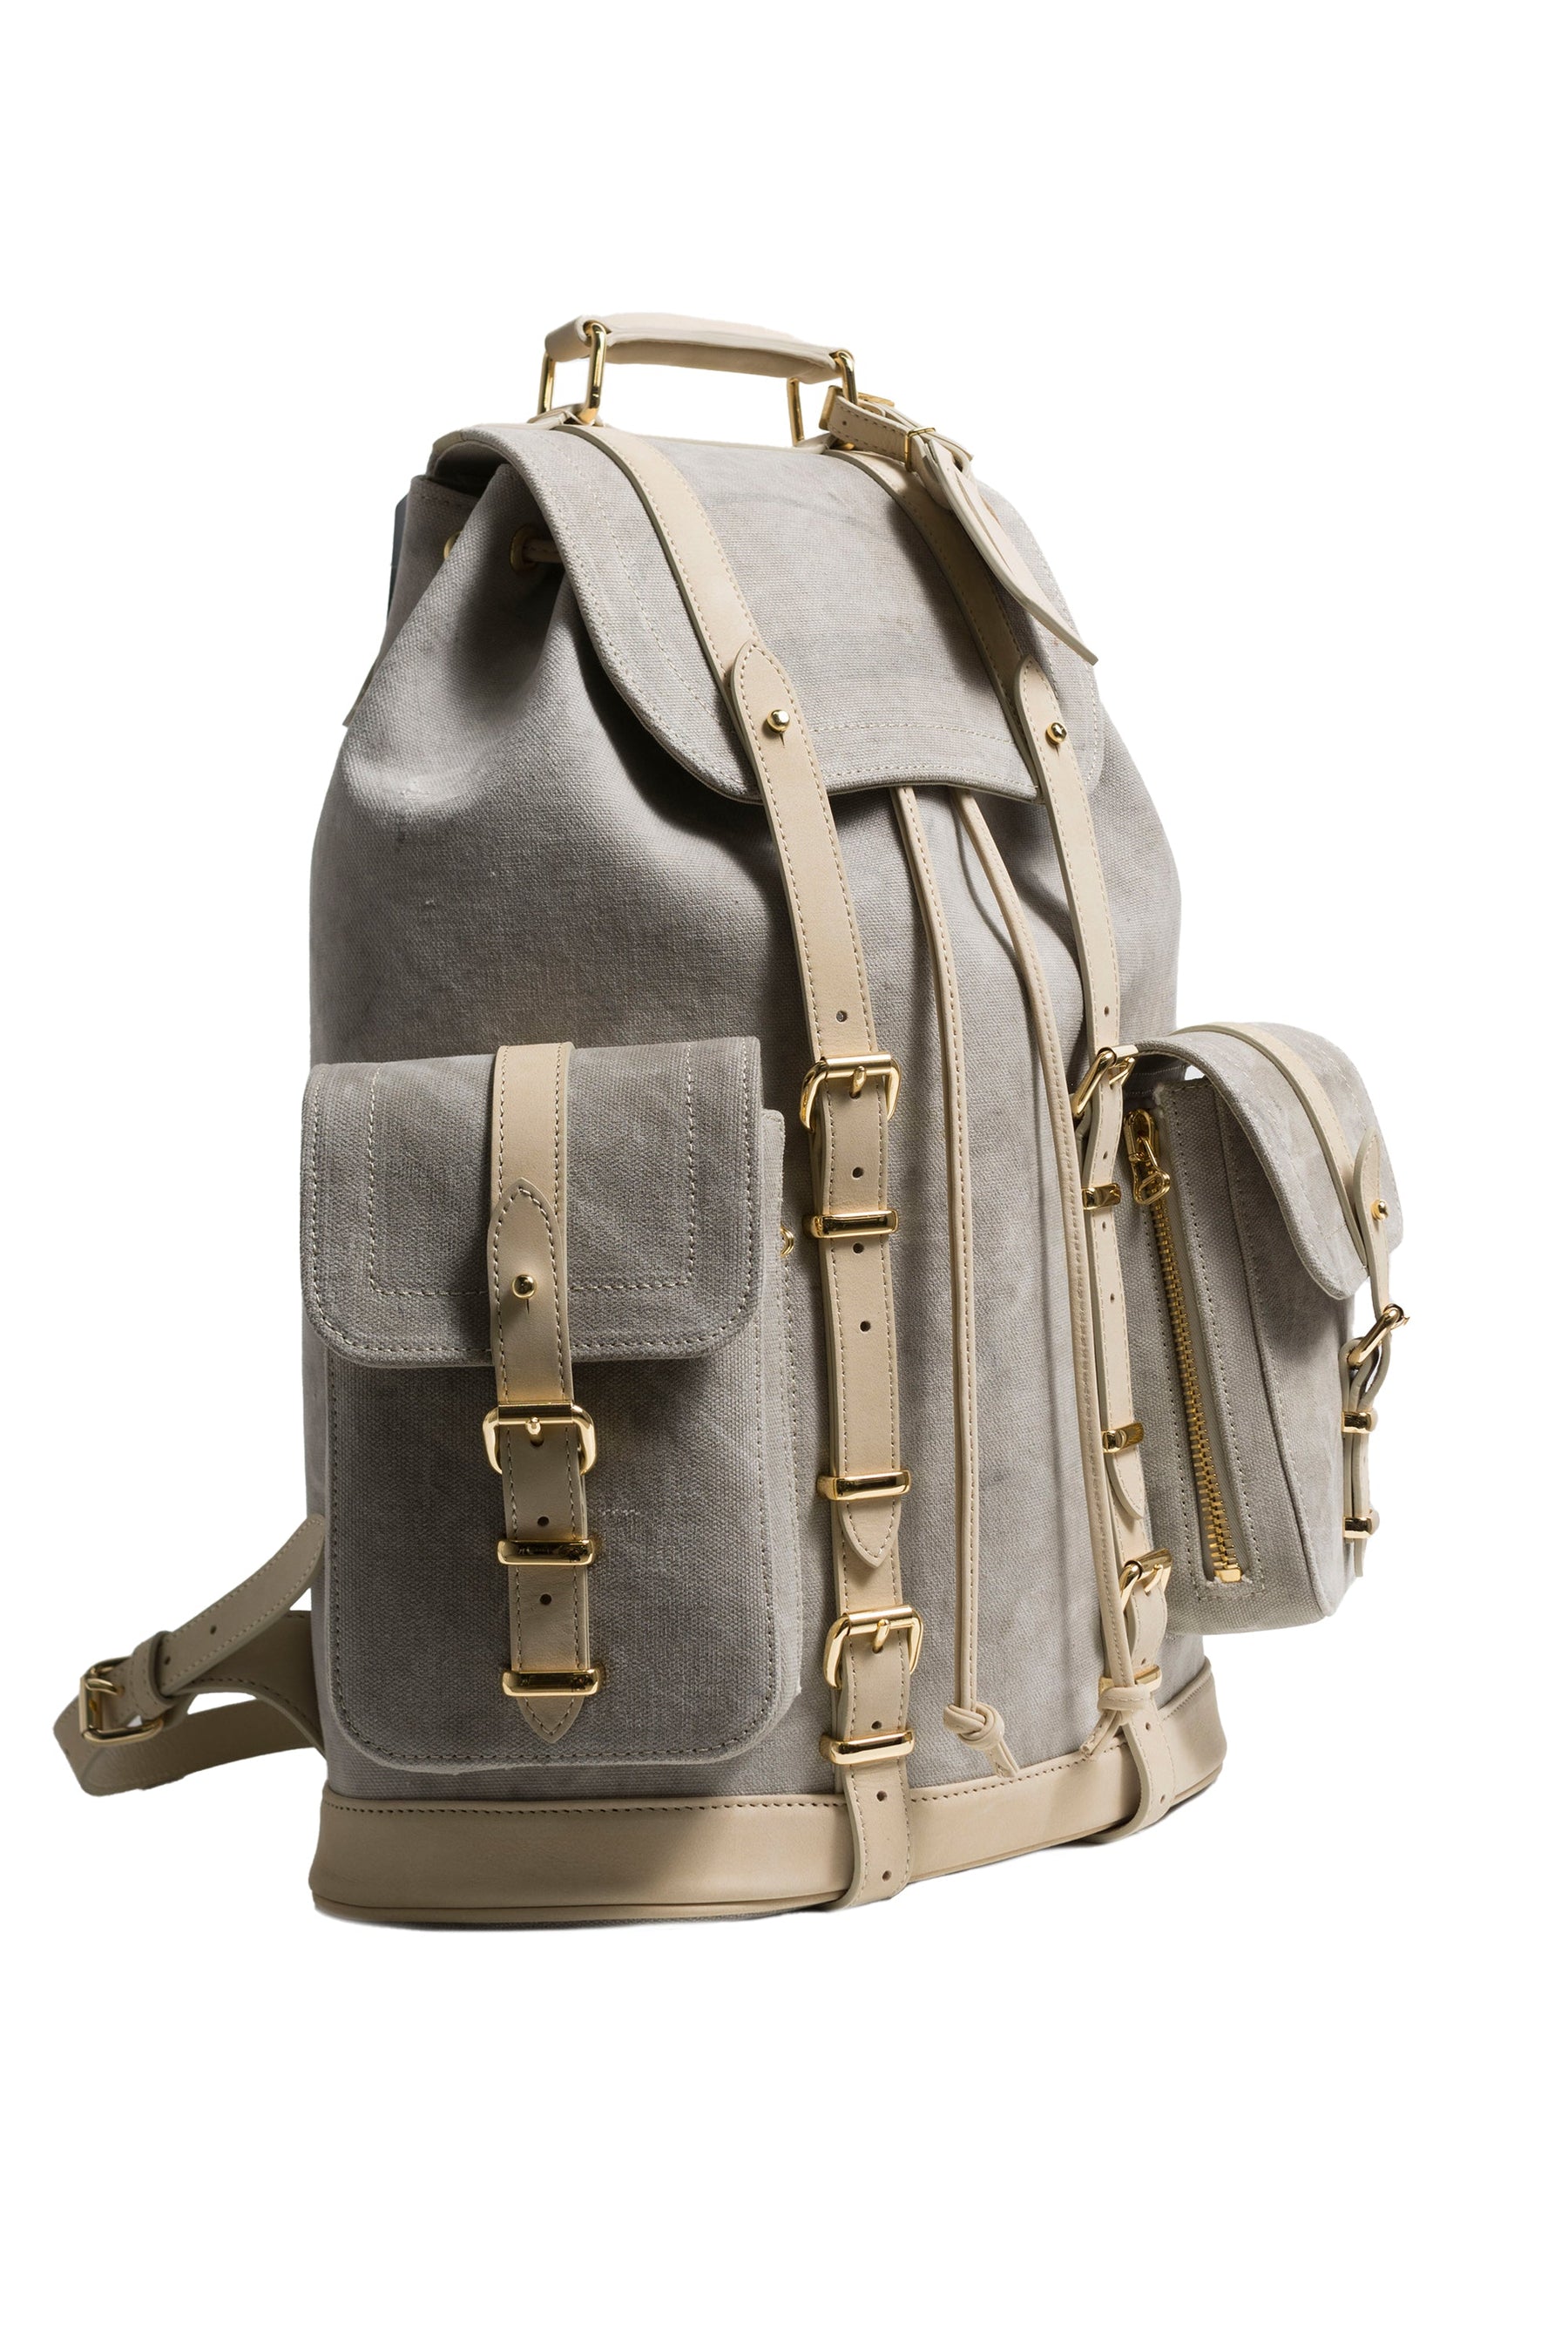 READYMADE FIELDPACK / WHT